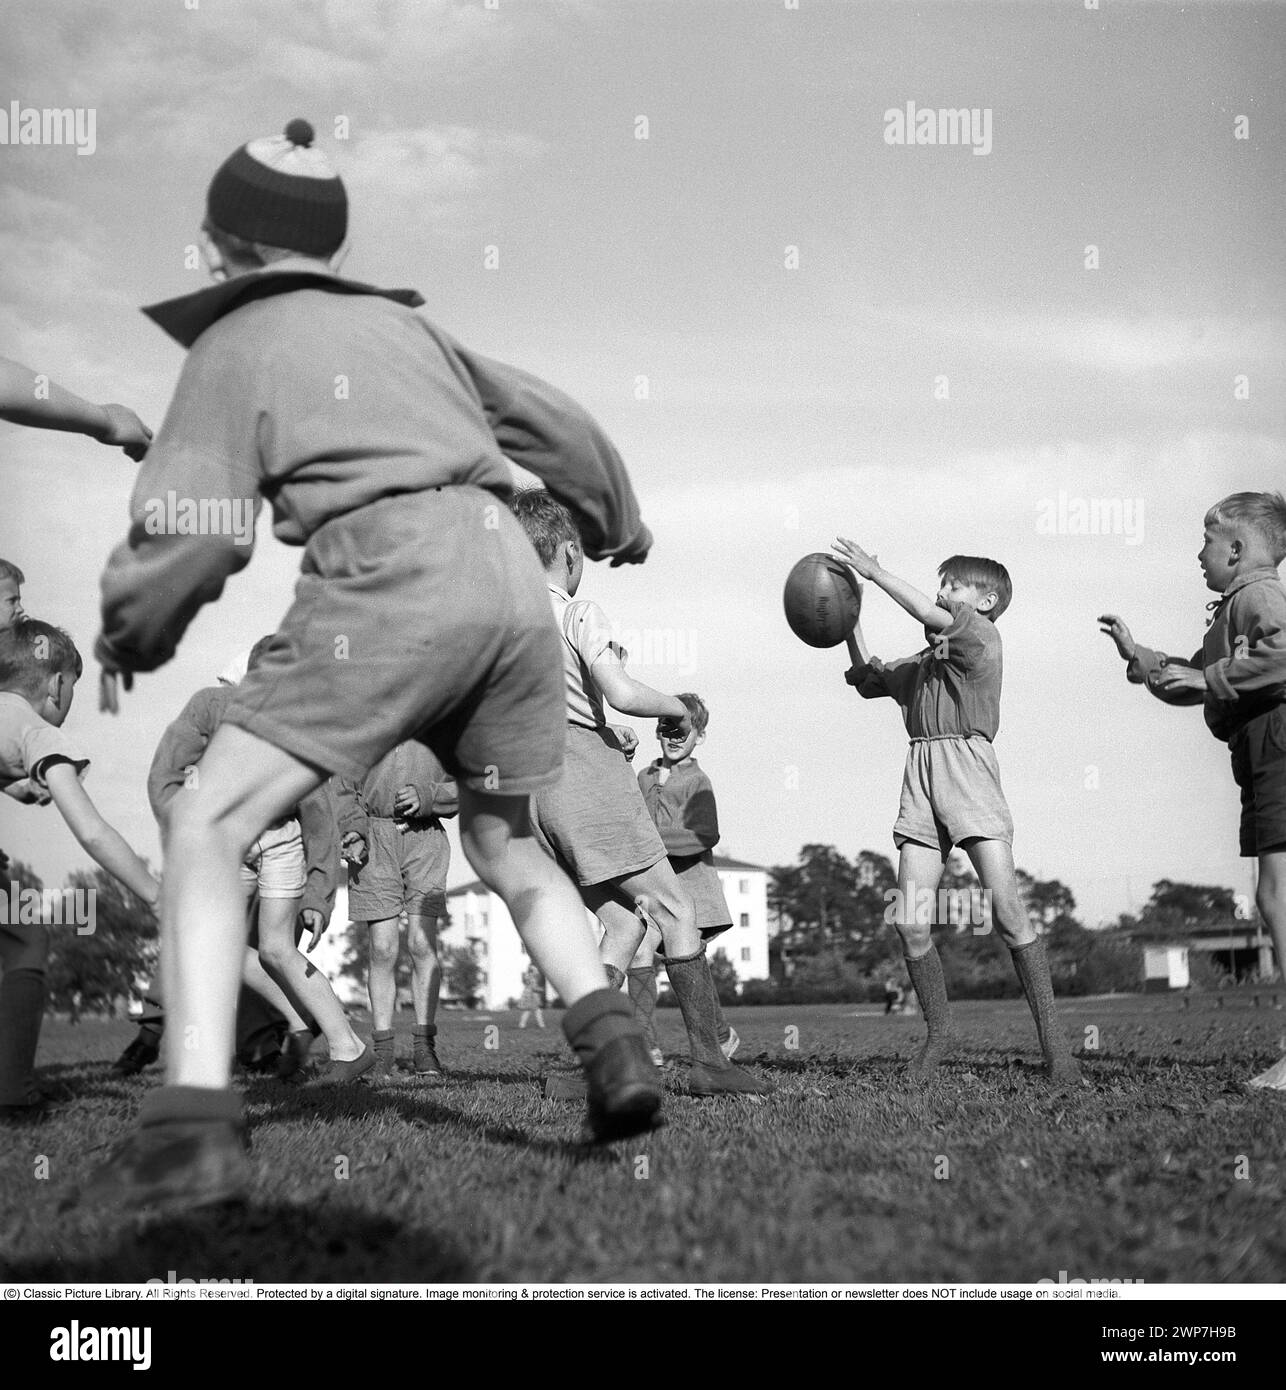 Rugby 1940. Young rugby players practise together. The rugby ball has an oval shape, four panels and a weight of about 400 grams. 1942. Kristoffersson ref A55-2 Stock Photo